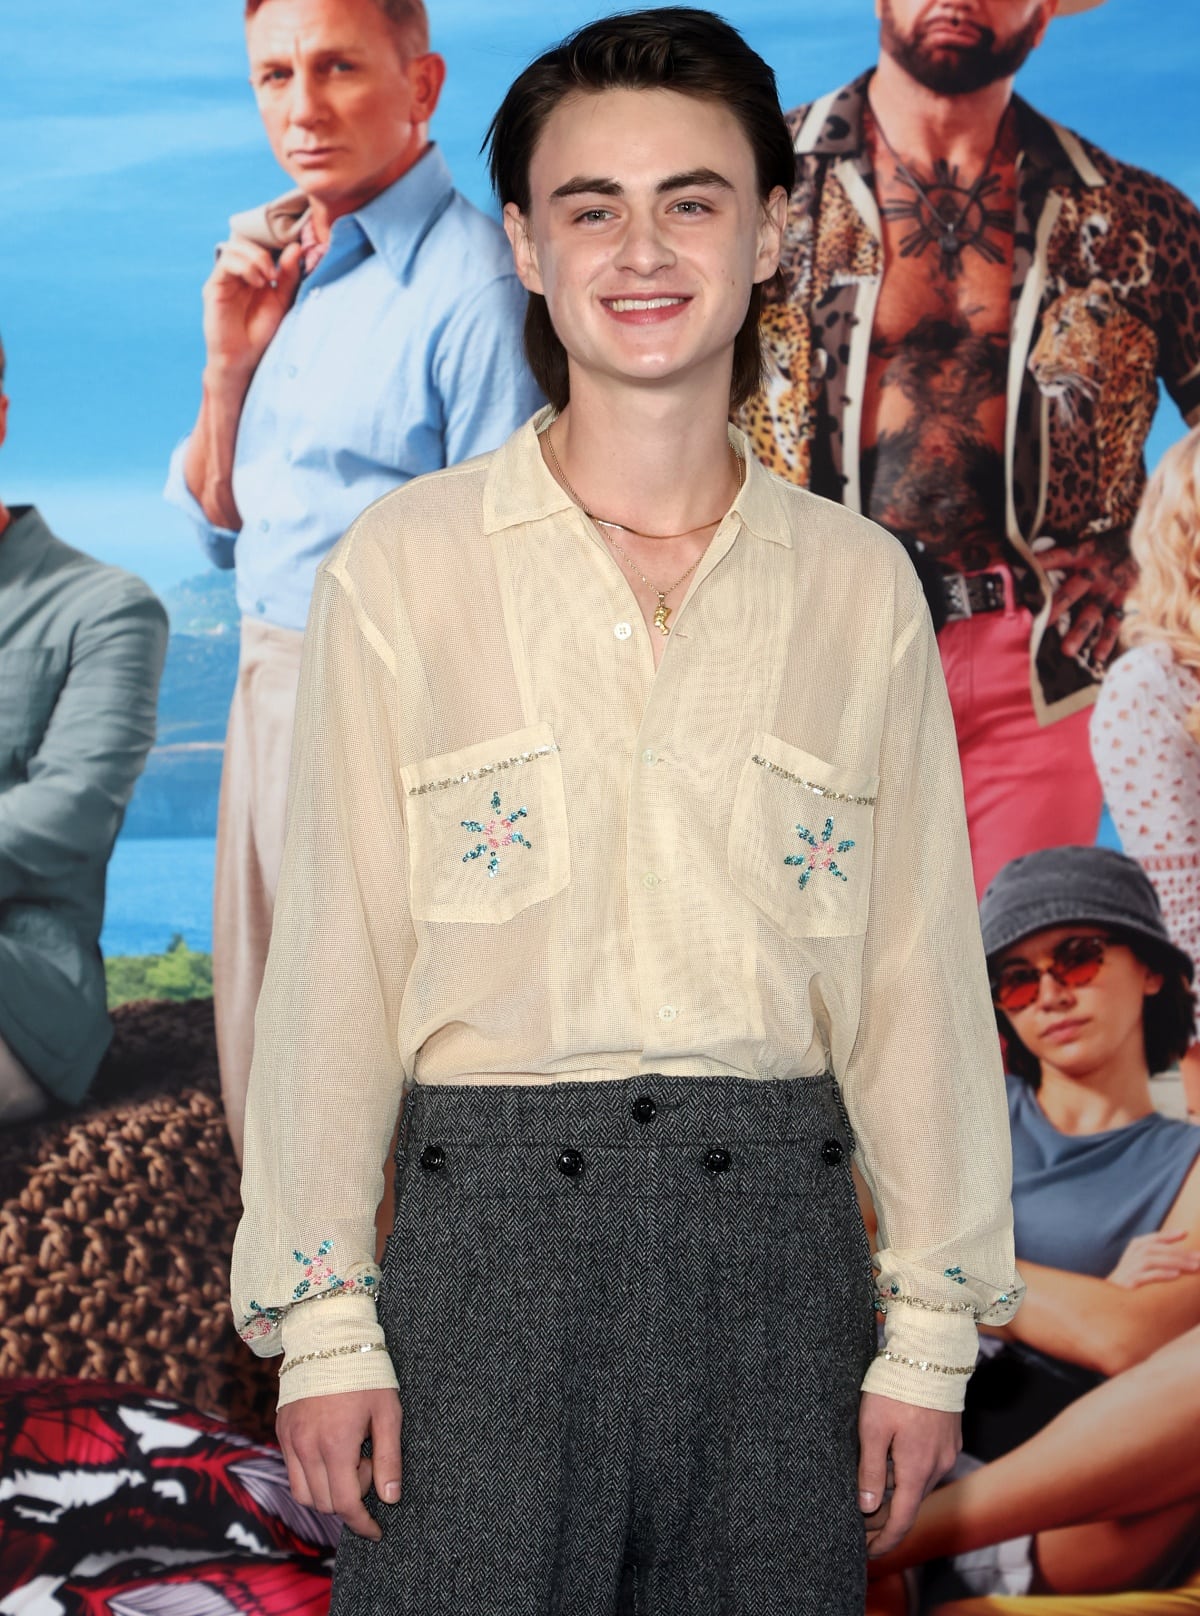 Jaeden Martell, born January 4, 2003, is an American actor recognized for his portrayal of Bill Denbrough in the 2017 and 2019 adaptations of Stephen King's novel "It," as well as for his roles in the mystery film "Knives Out" (2019) and the miniseries "Defending Jacob" (2020)